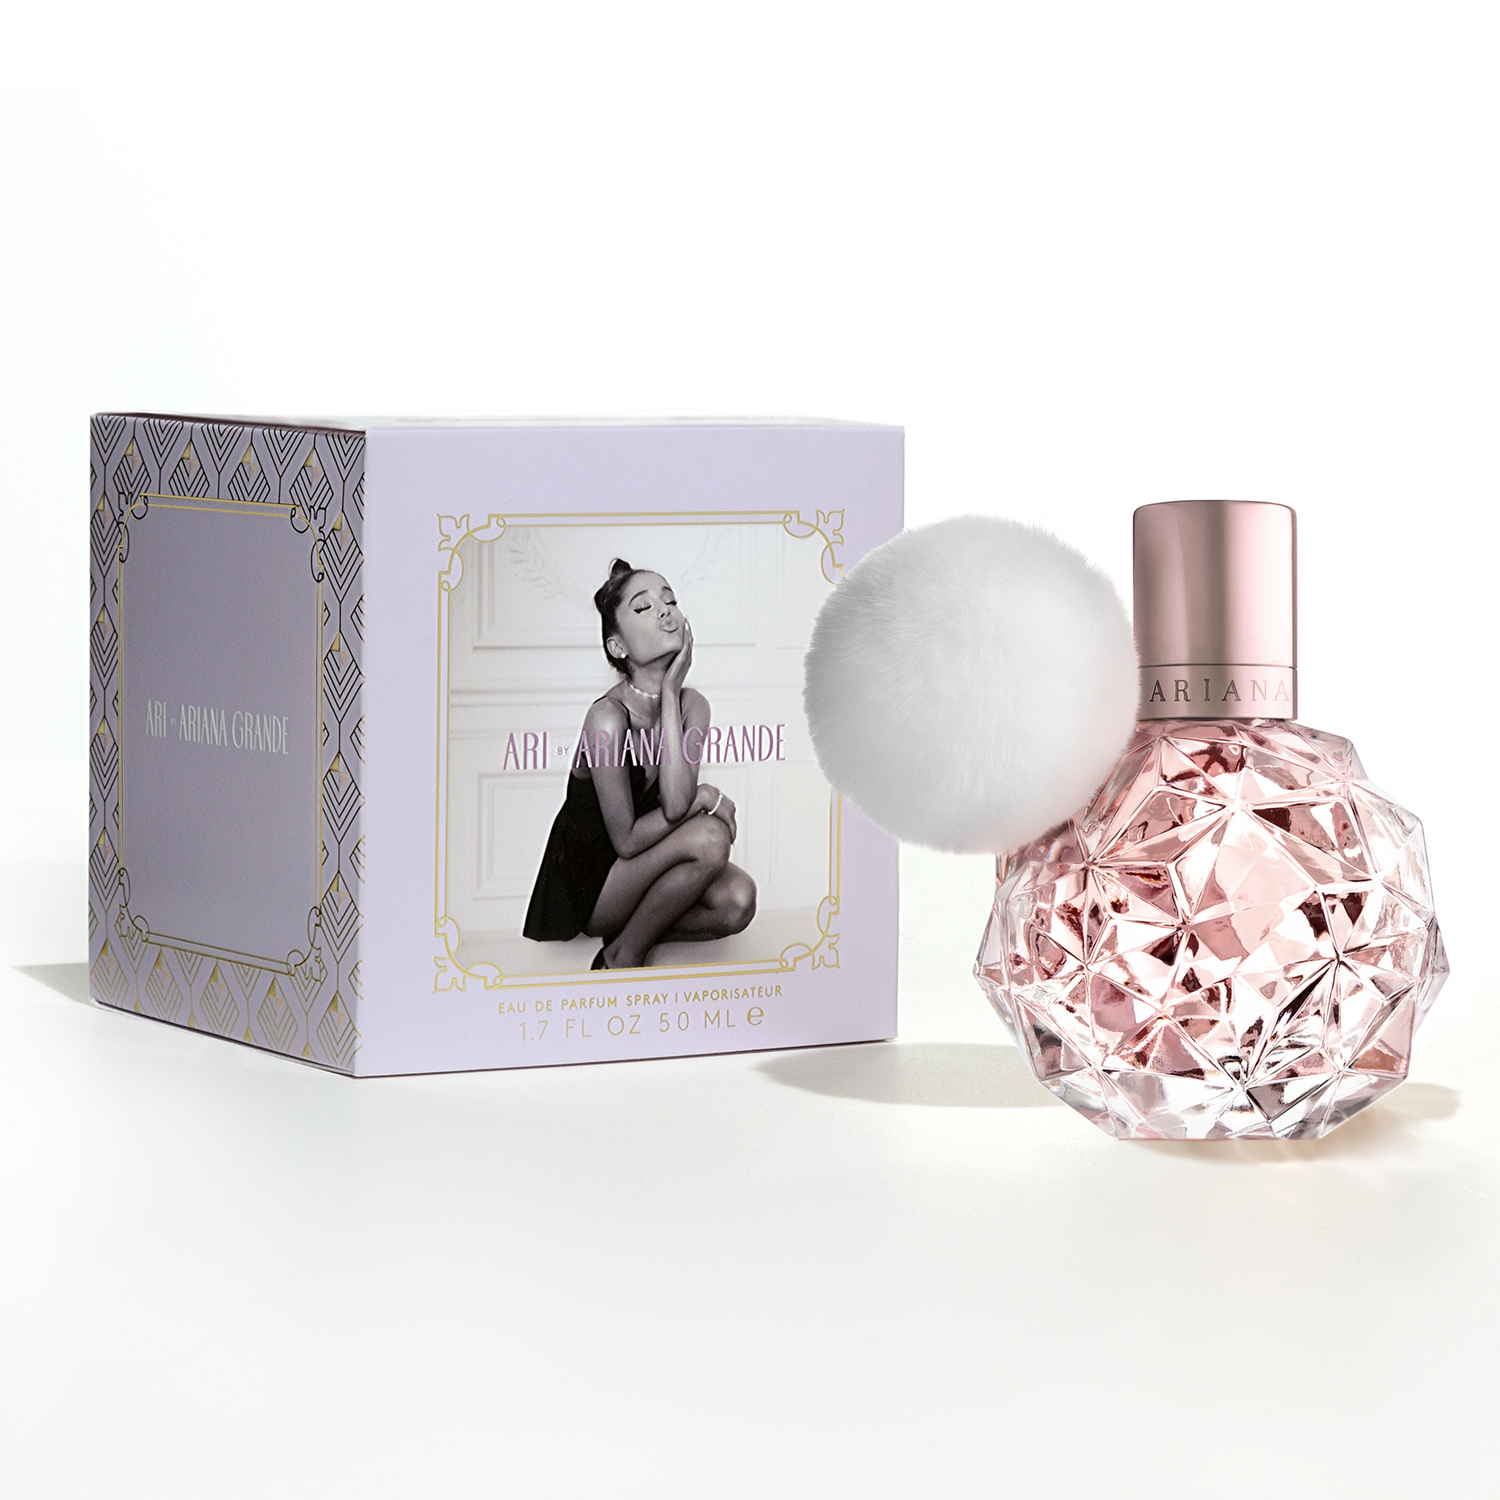 Ari by Ariana Grande perfume bottle and packaging